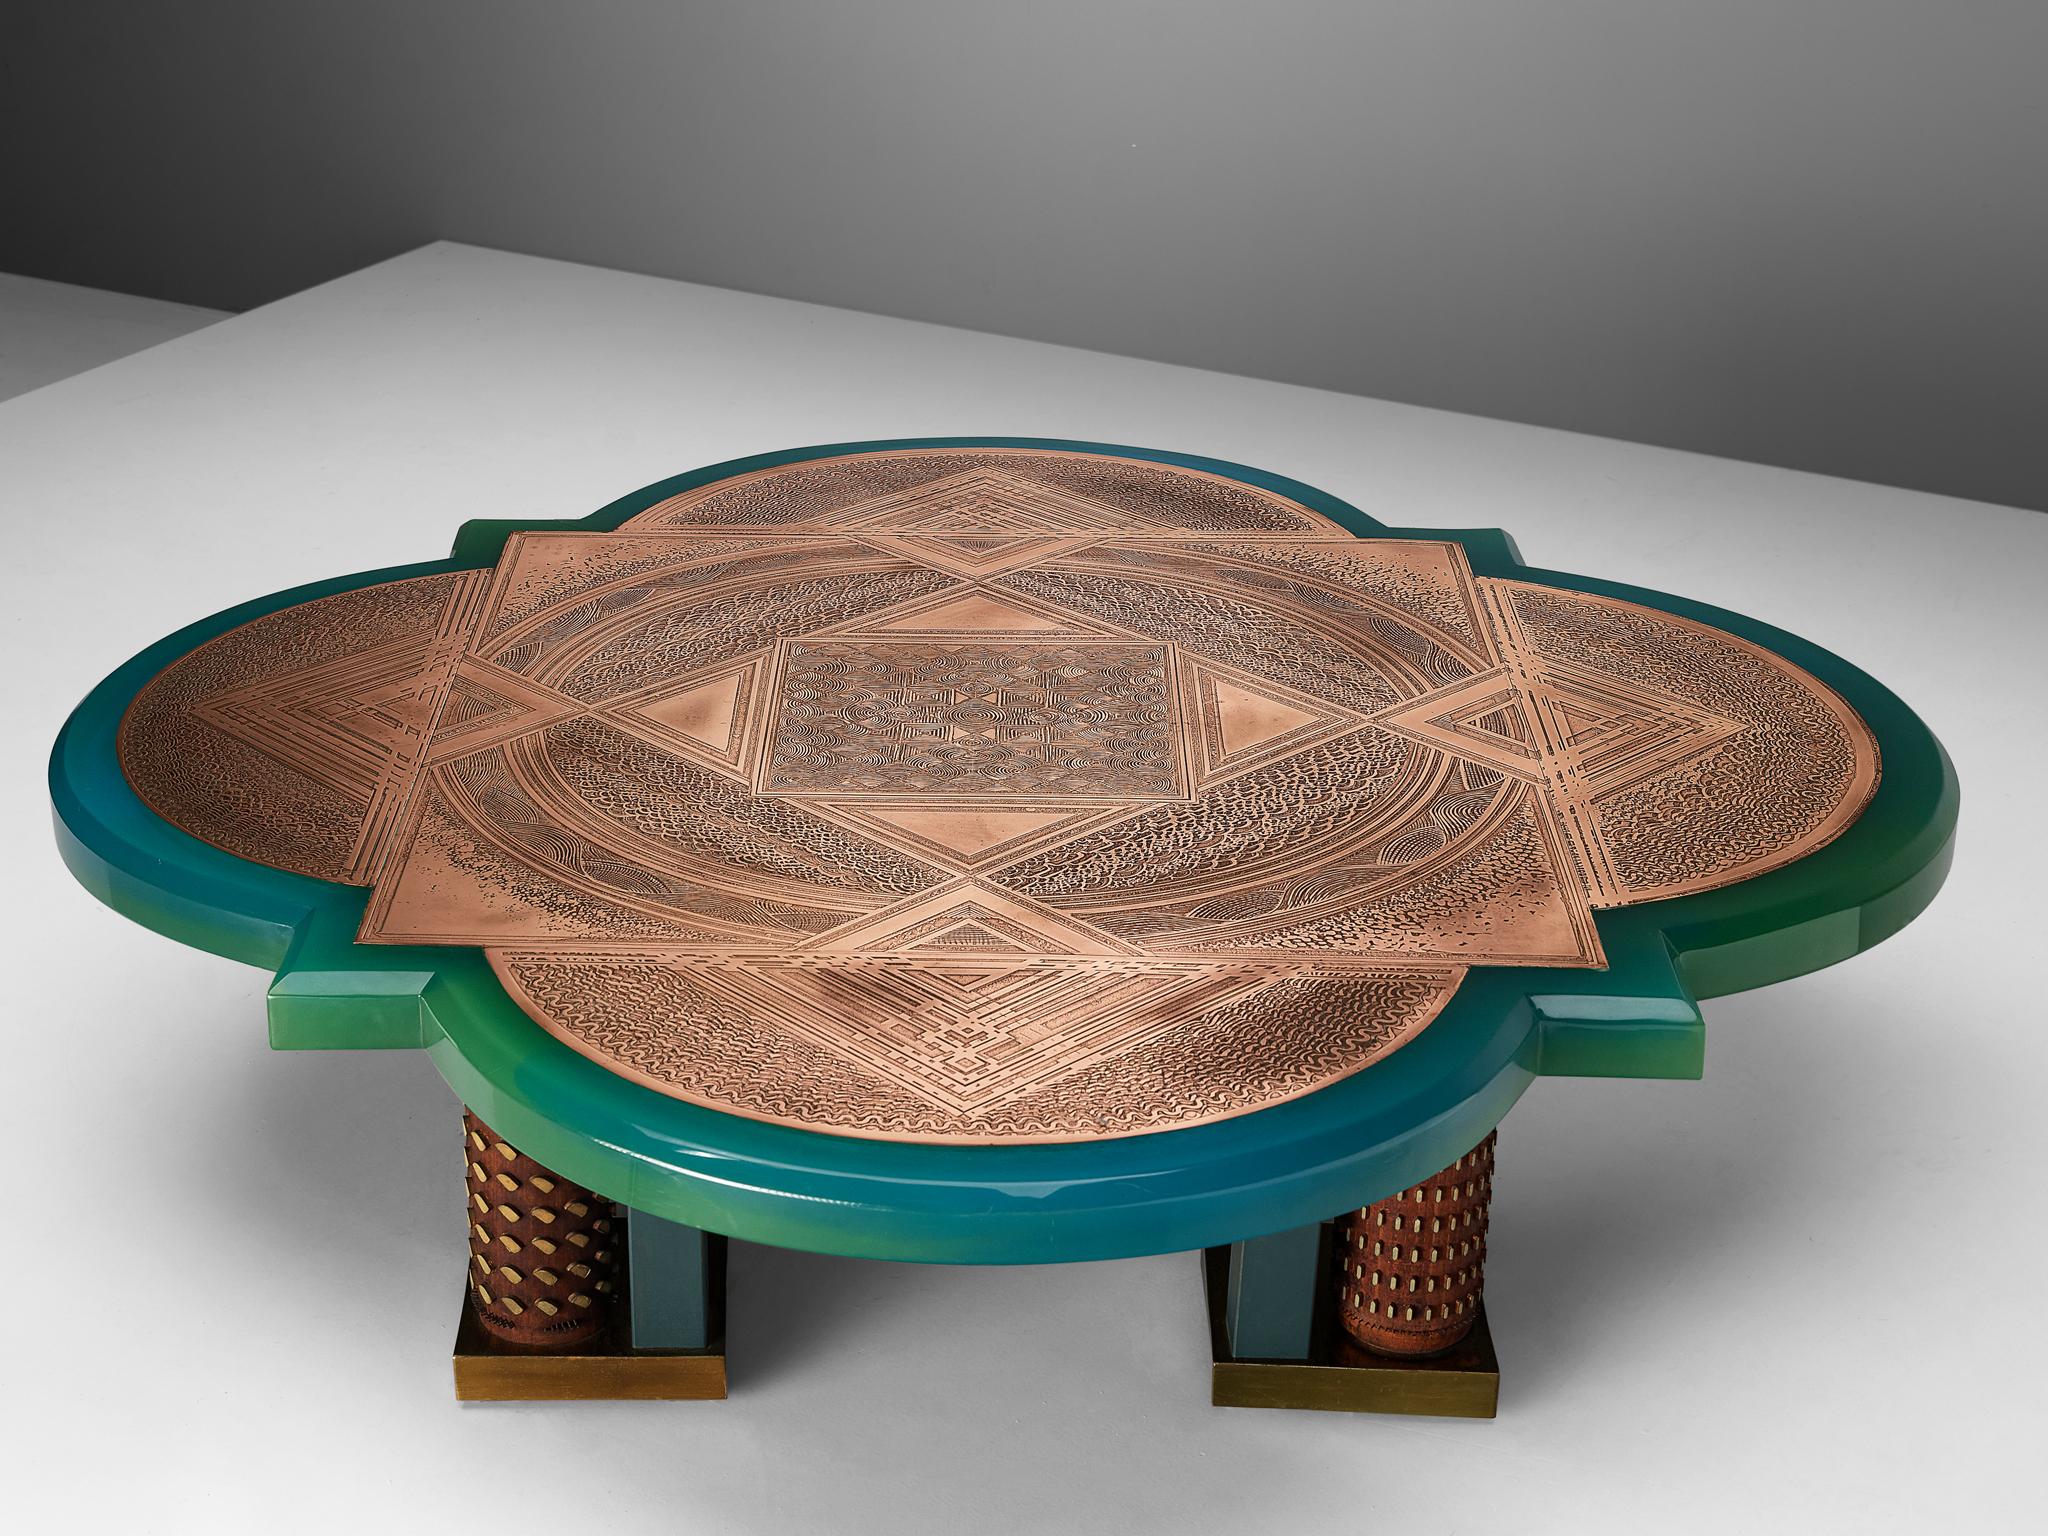 Armand Jonckers, coffee table, resin, copper, wood, metal, Belgium, 1984

Gorgeous, custom-made coffee table by Belgian designer Armand Jockers. Every detail of this sculptural table catches the eye. The pure combination of refined materials like